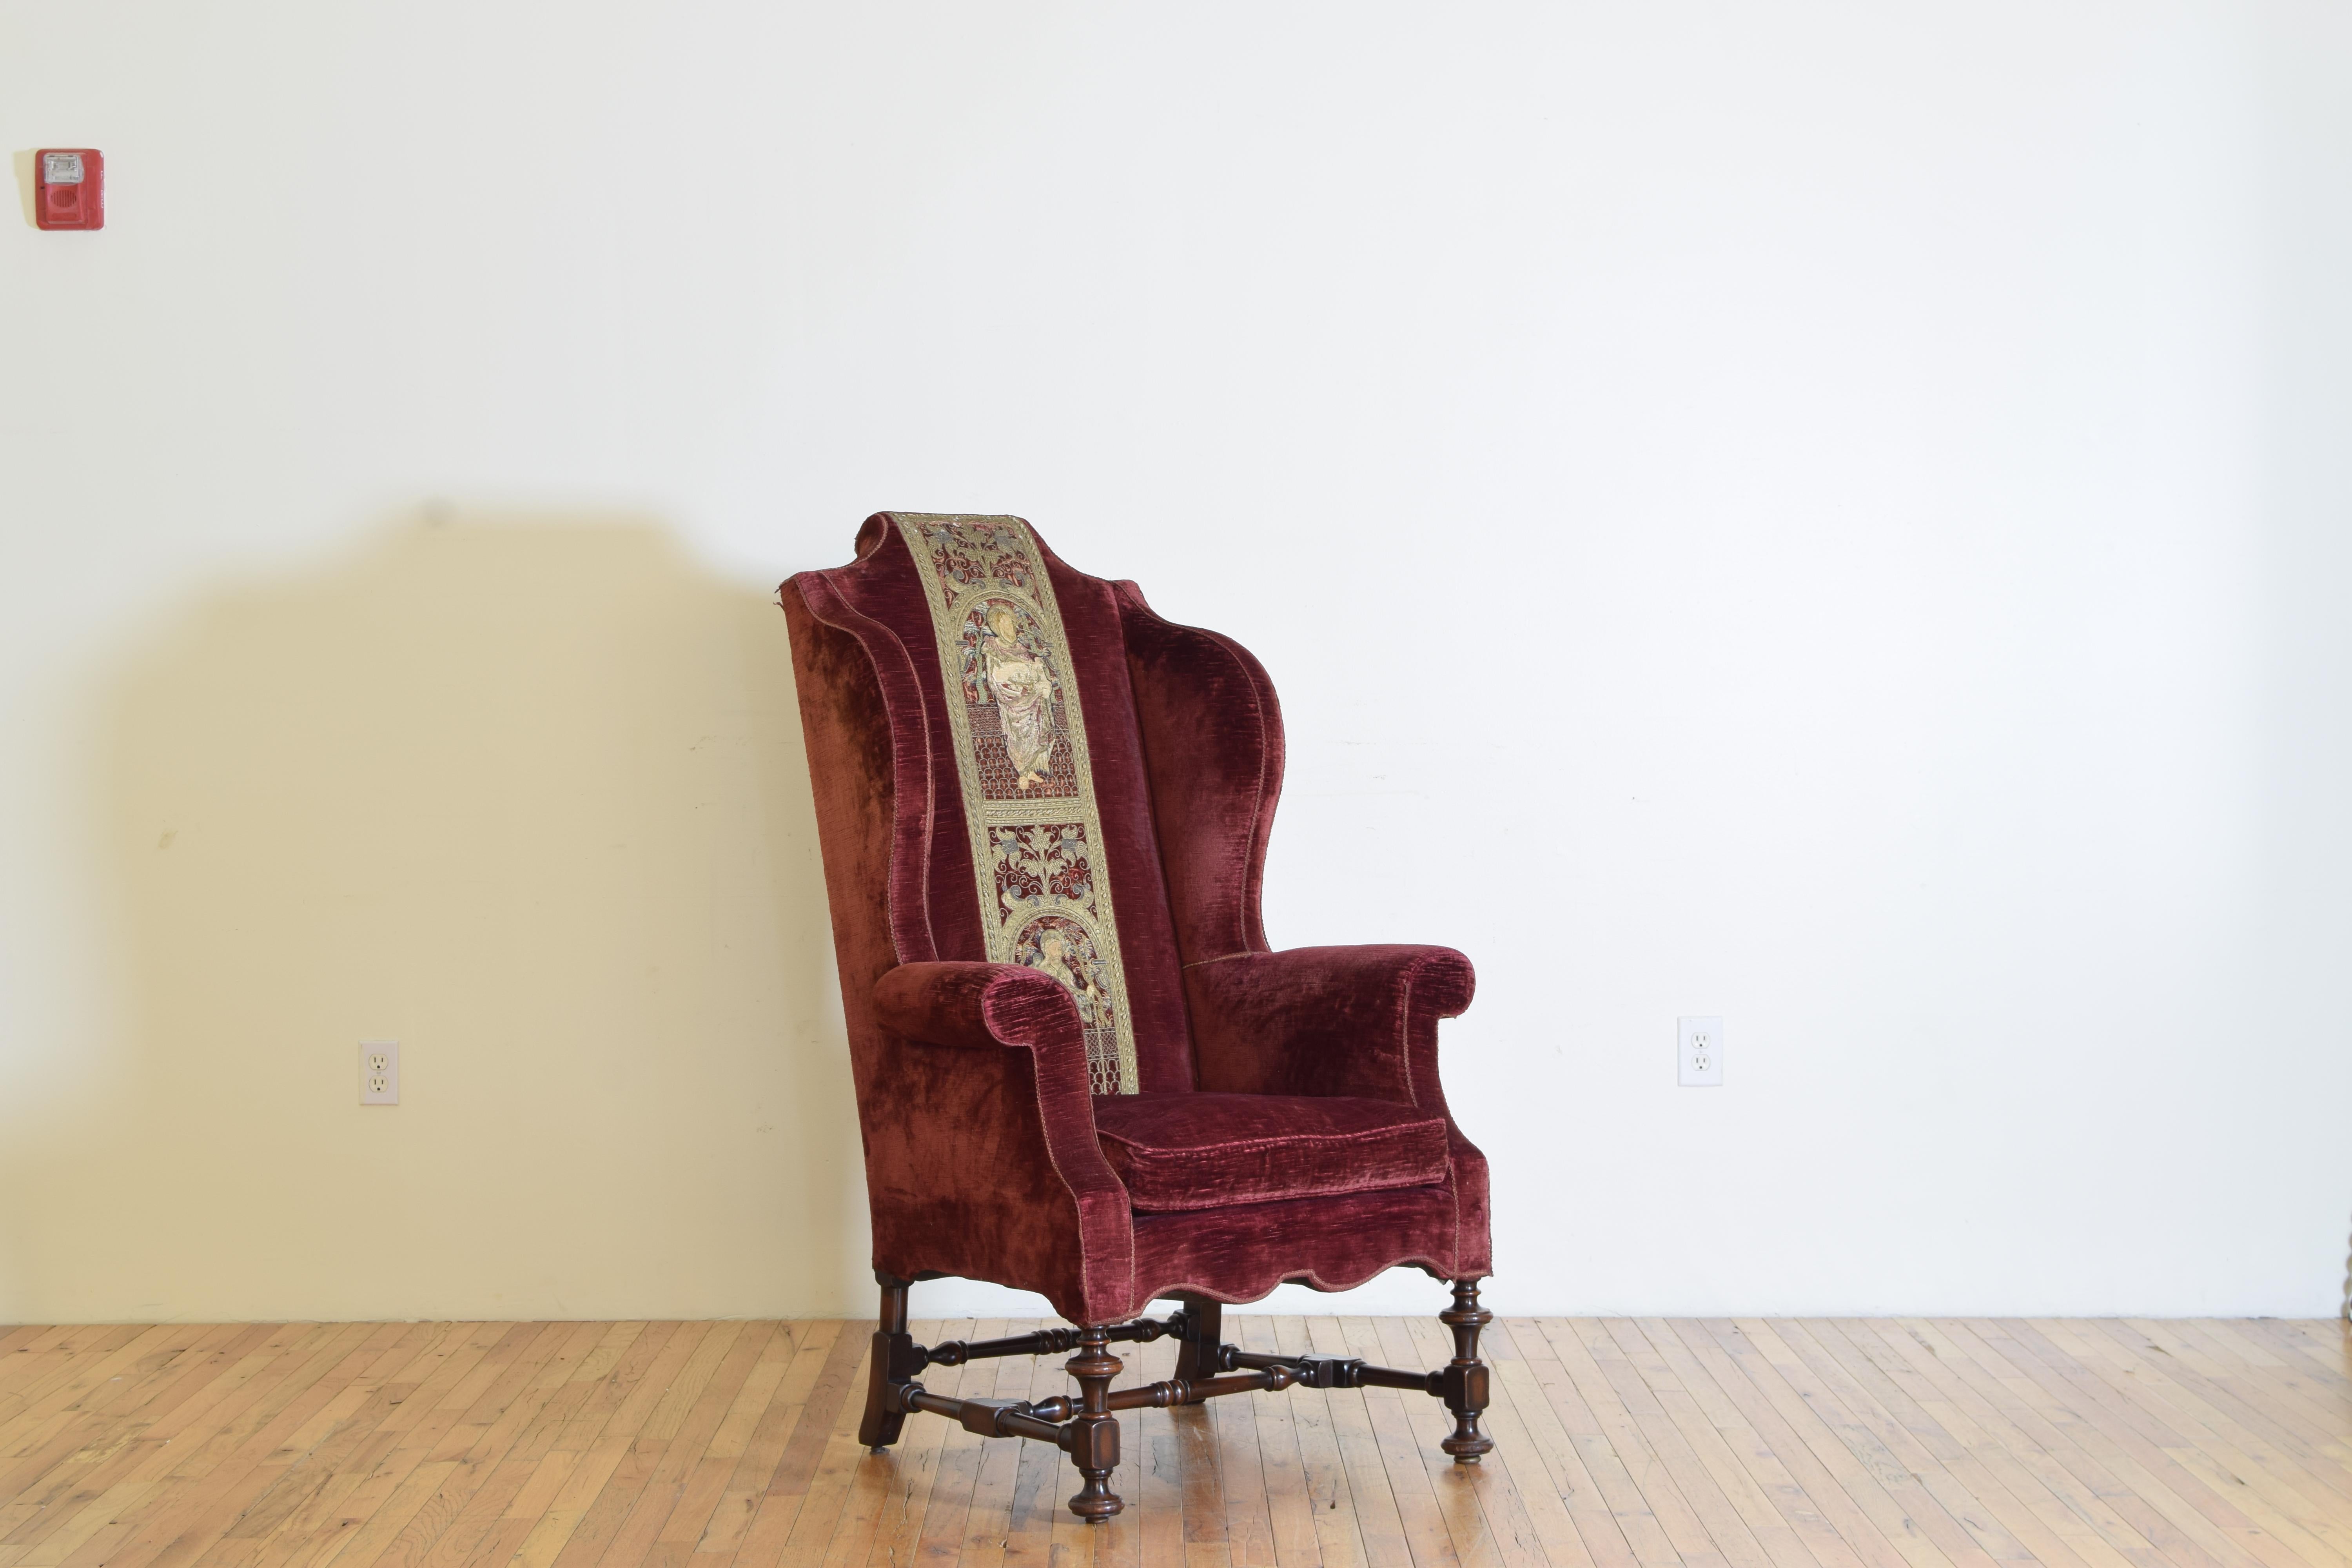 Of large proportion and very comfortable, retaining its original velvet upholstery this wingchair has a unique feature in that the decorative elements is woven from gold and silk threads and was likely originally from a vestment worn by clergy, the